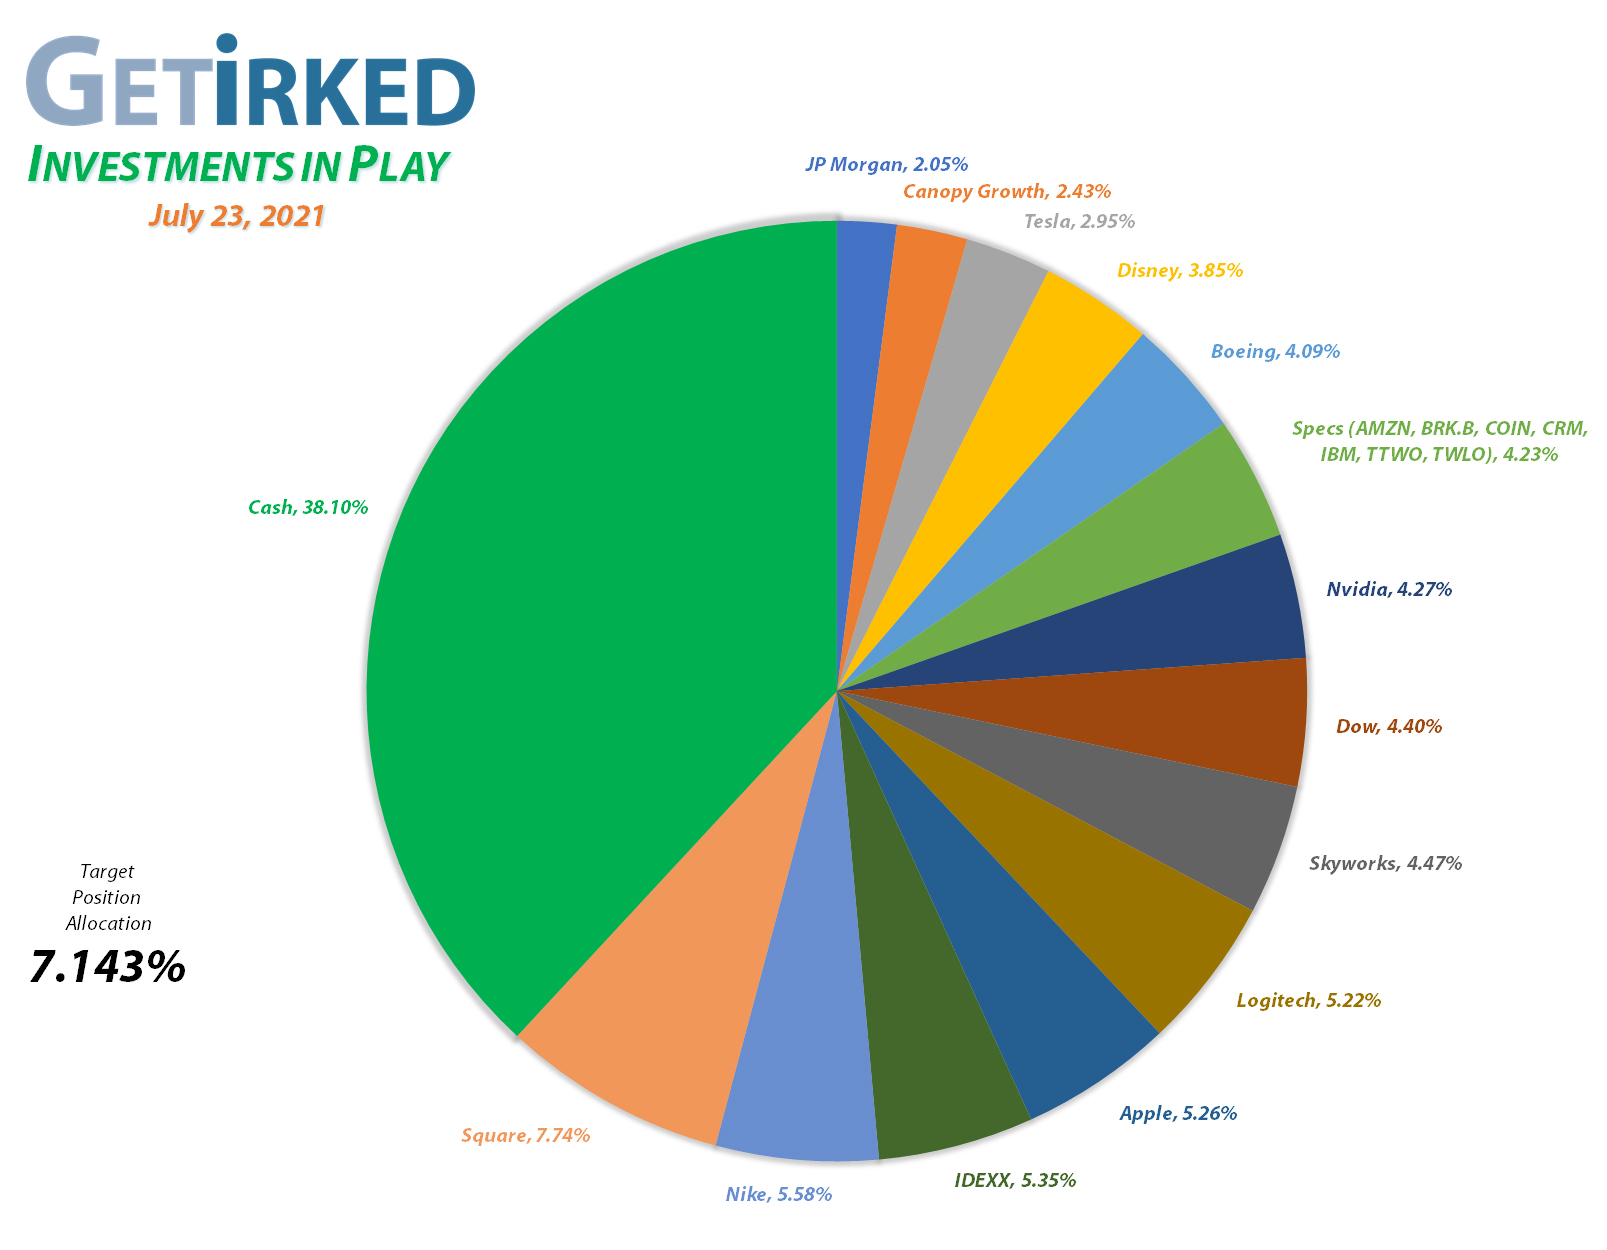 Get Irked - Investments in Play - Current Holdings - March 12, 2021et Irked's Pandemic Portfolio Holdings as of July 23, 2021